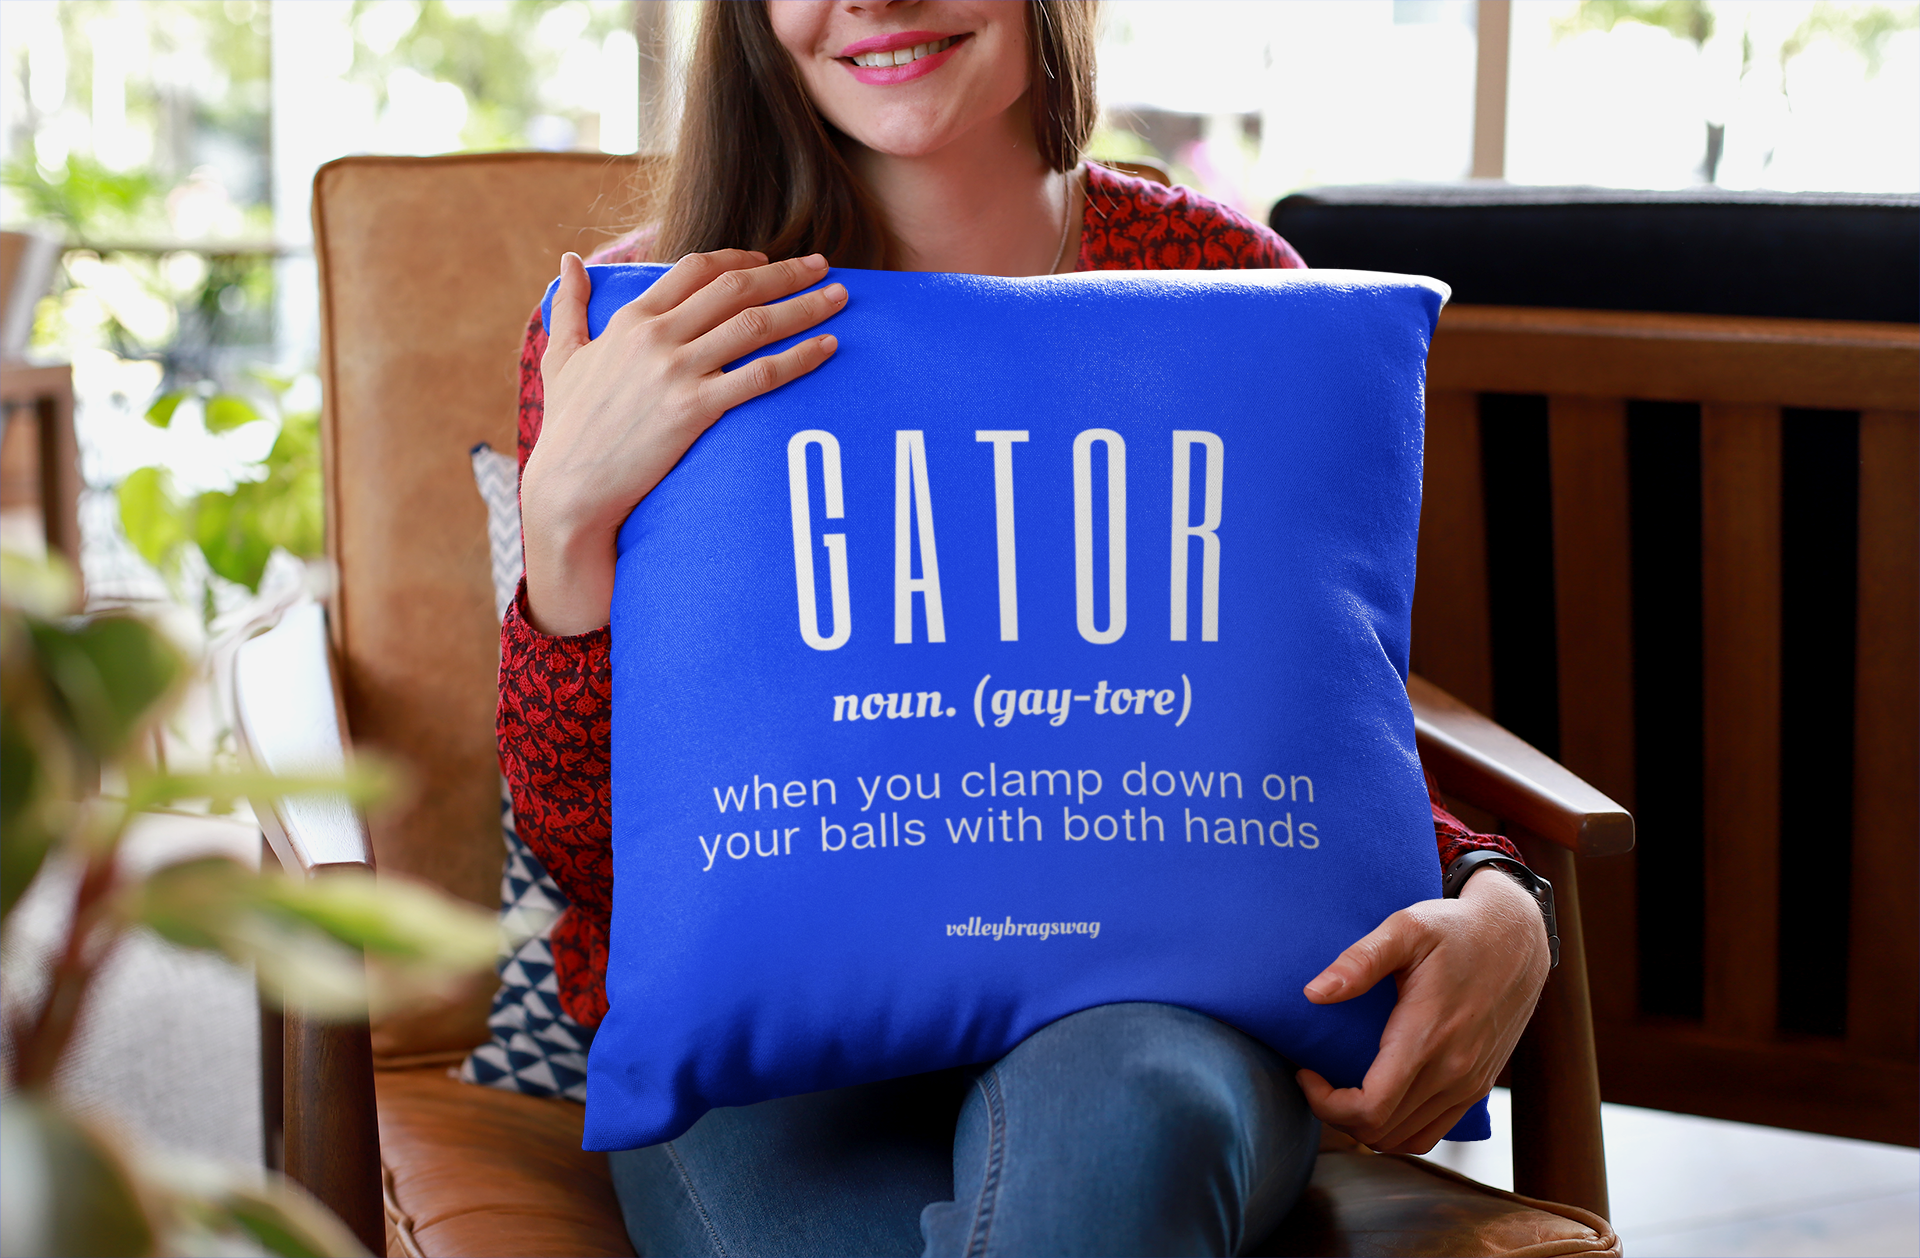 GATOR (noun) When You Clamp Down On Both Your Balls With Two Hands volleyball pillow. April Chapple, Launches a Hilarious Volleyball Pillow Line With Fun Tongue-in-Cheek Designs sure to make players and enthusiasts laugh.